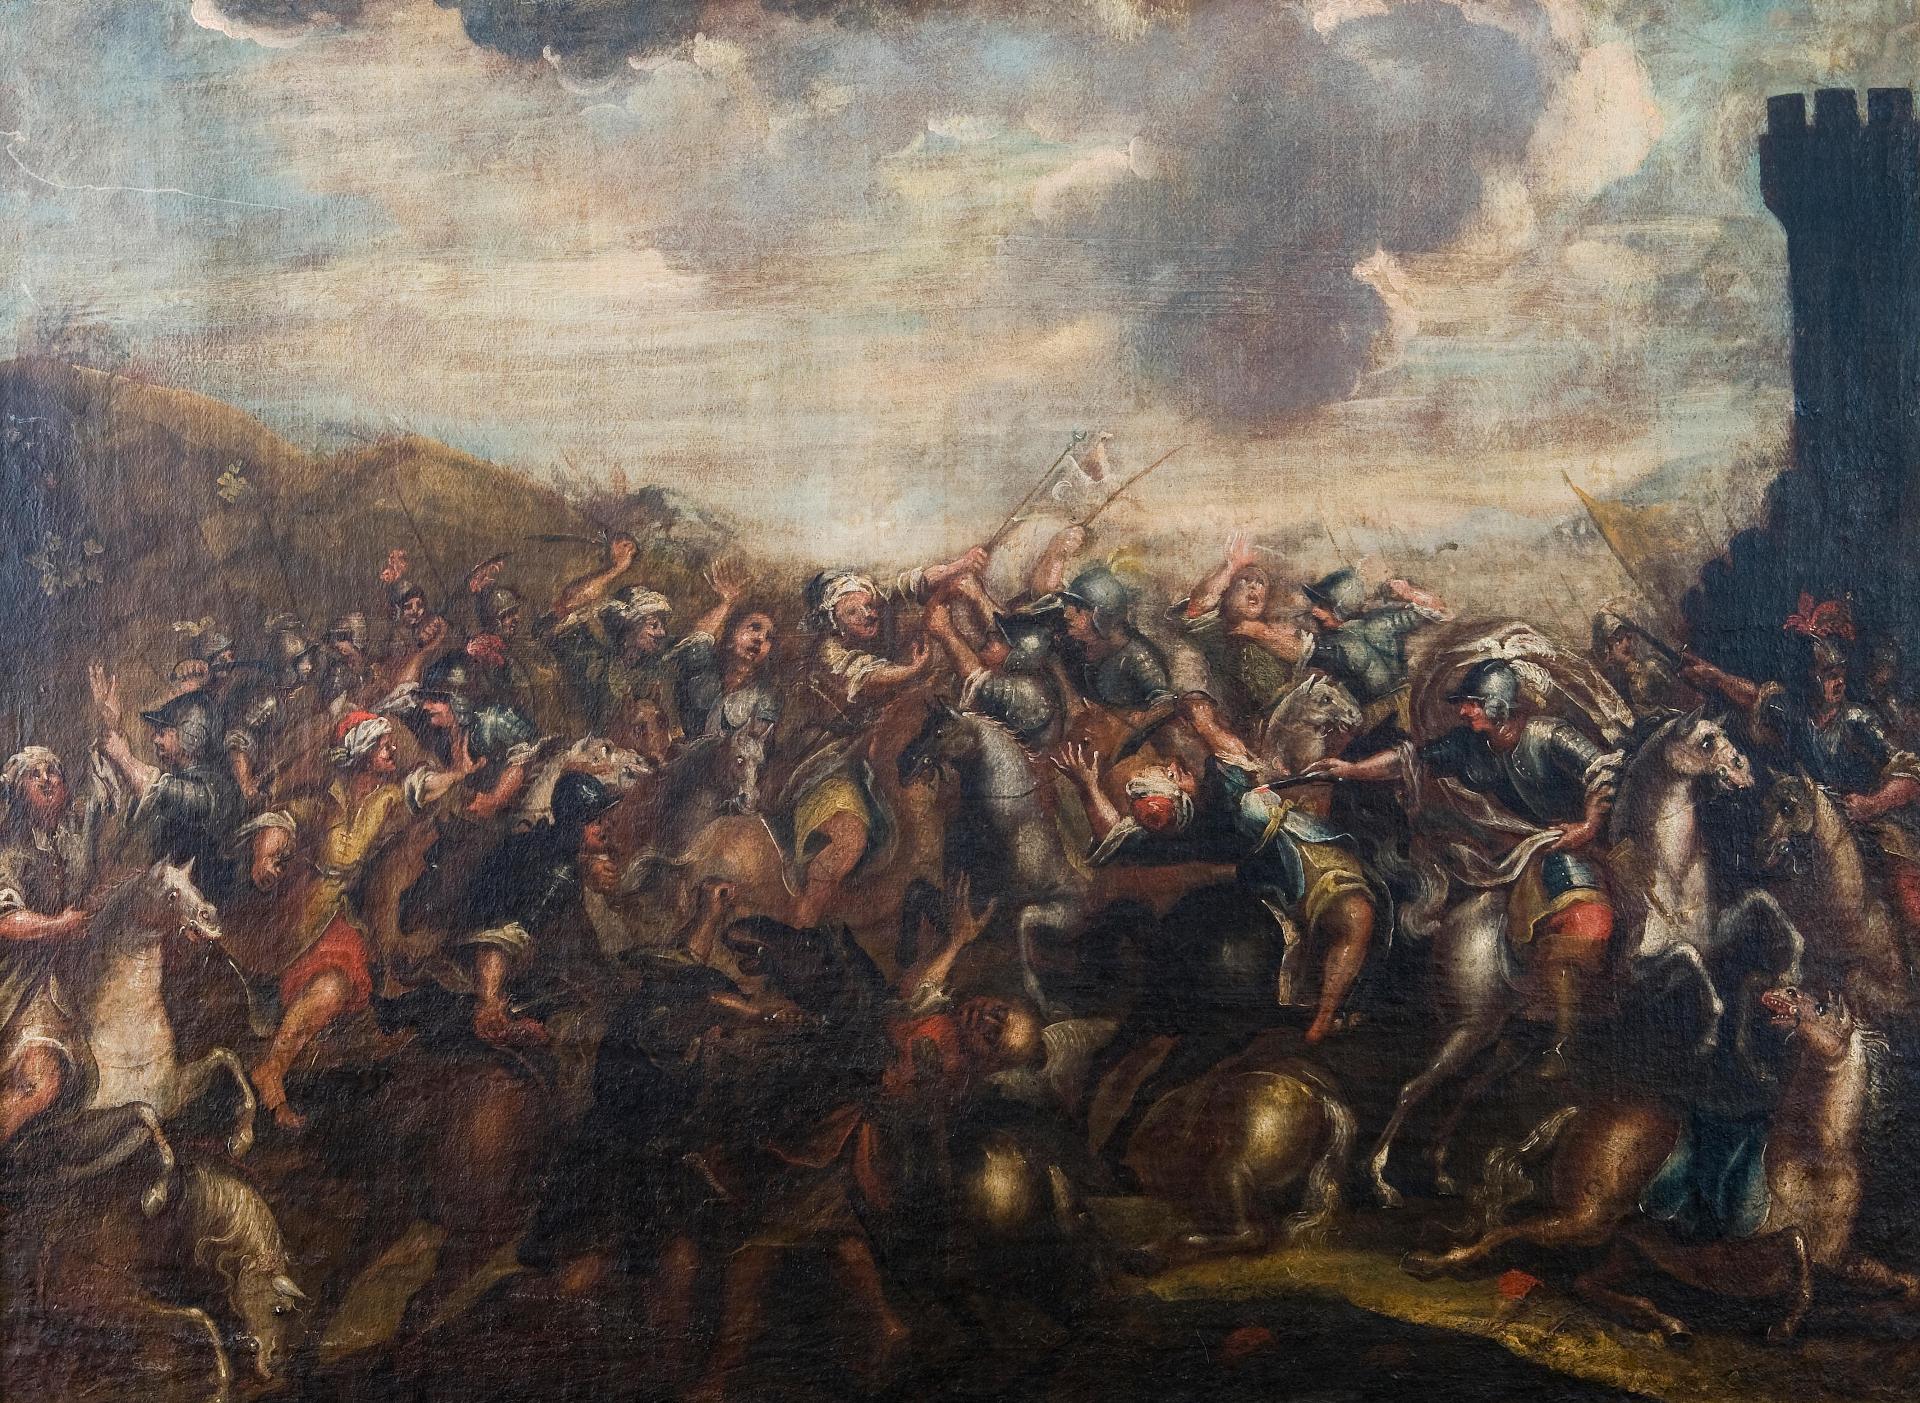 Pieter Meulener (1602-1654) - The Fight for the Standard, Turkish and European armies outside a fortified city; Cavalry skirmish, ships at sea in the distance